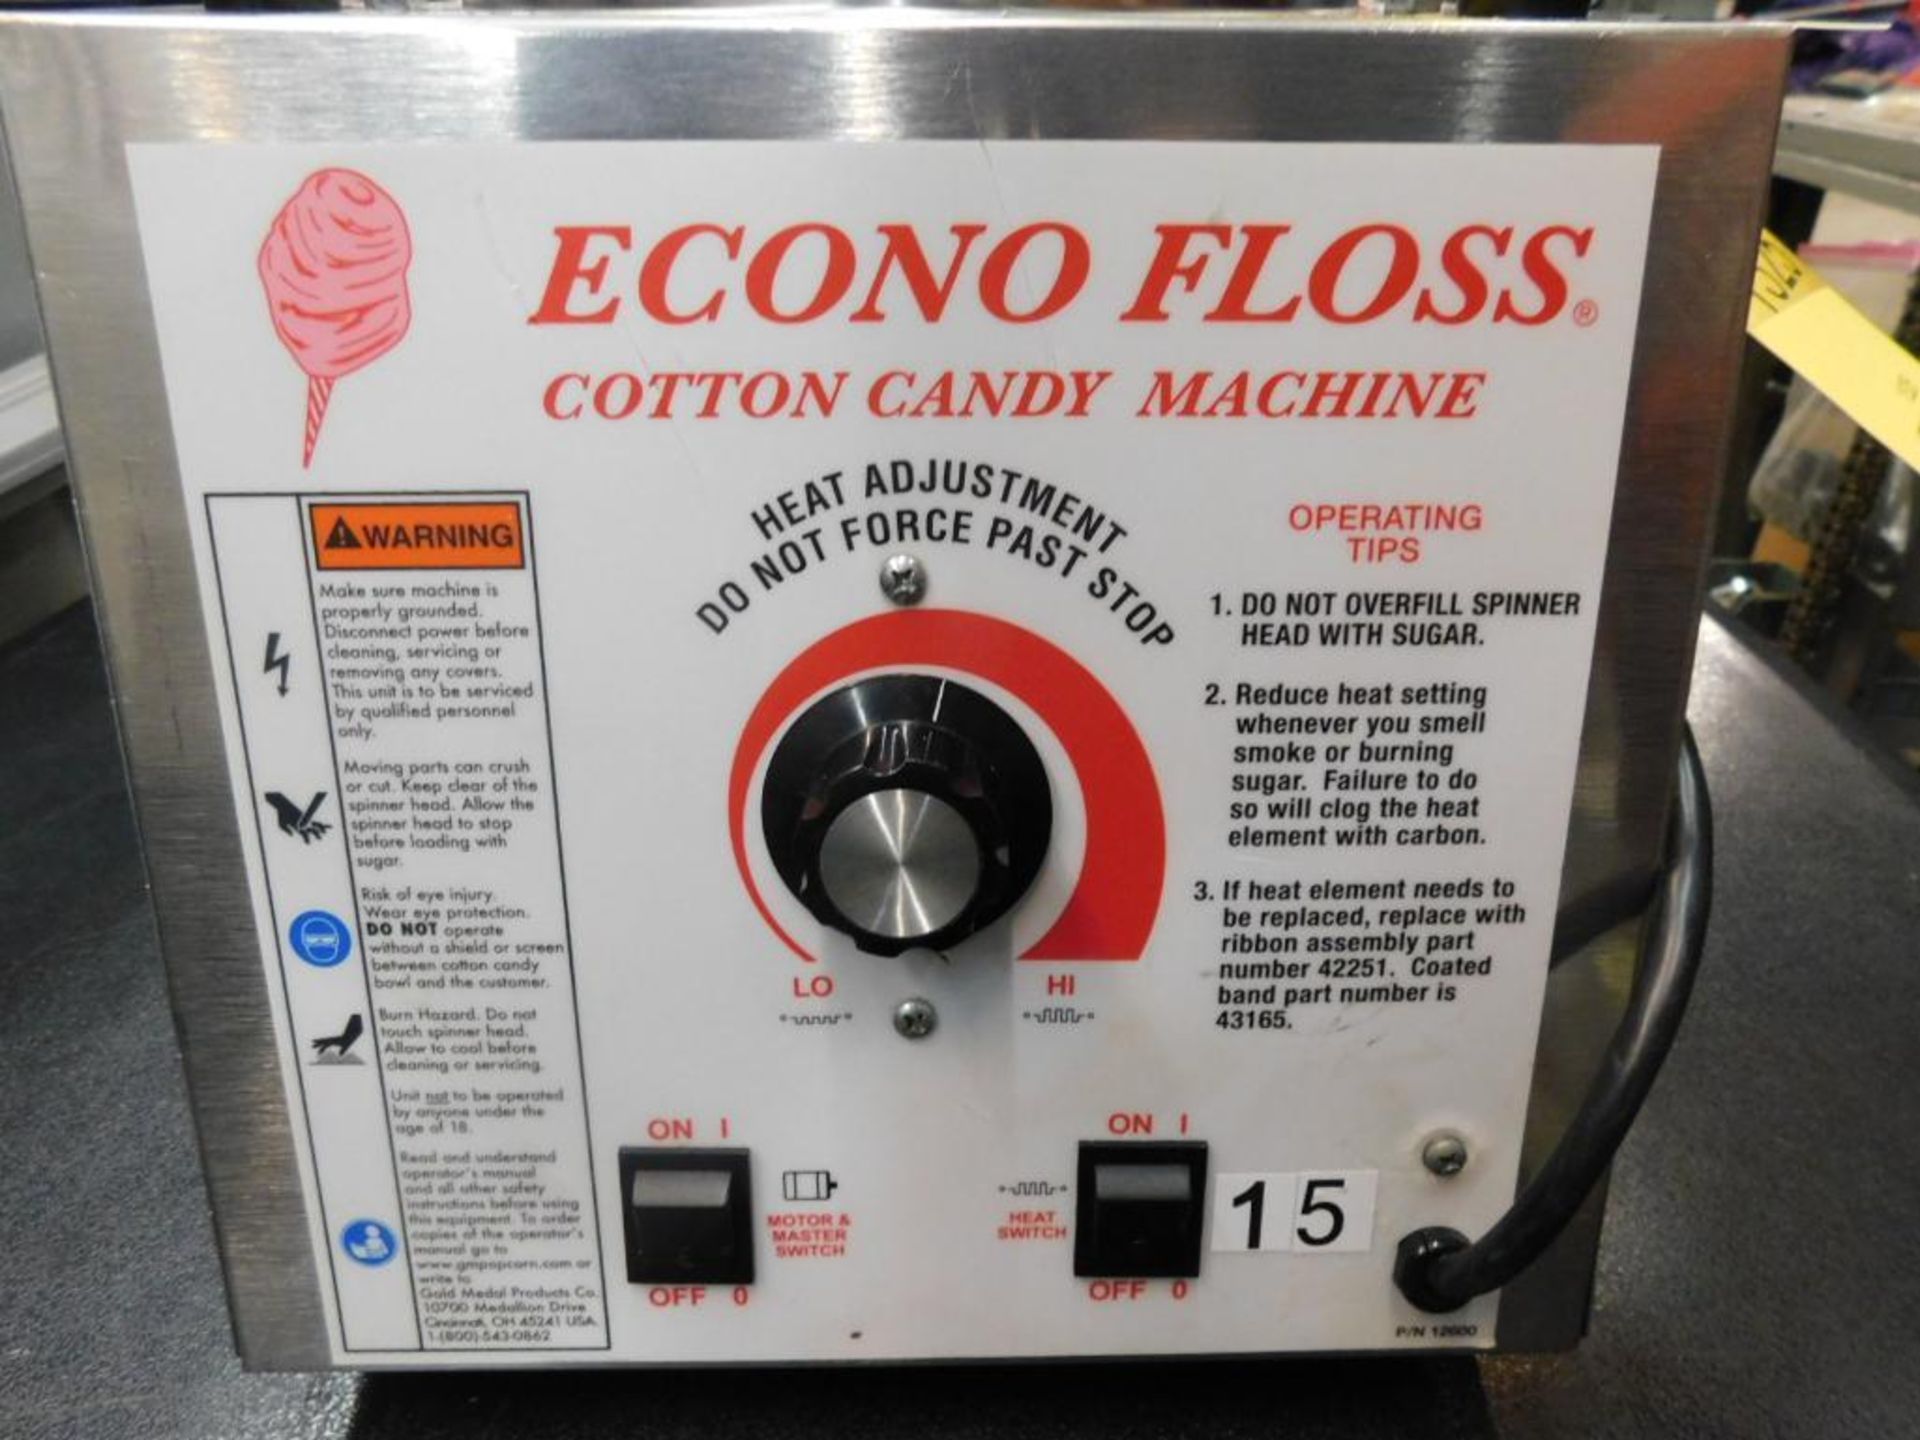 Gold Metal Econo Floss Cotton Candy Machine, Model 3017SS (LOCATION: 1766 Waukegan Rd., Glenview, IL - Image 6 of 7